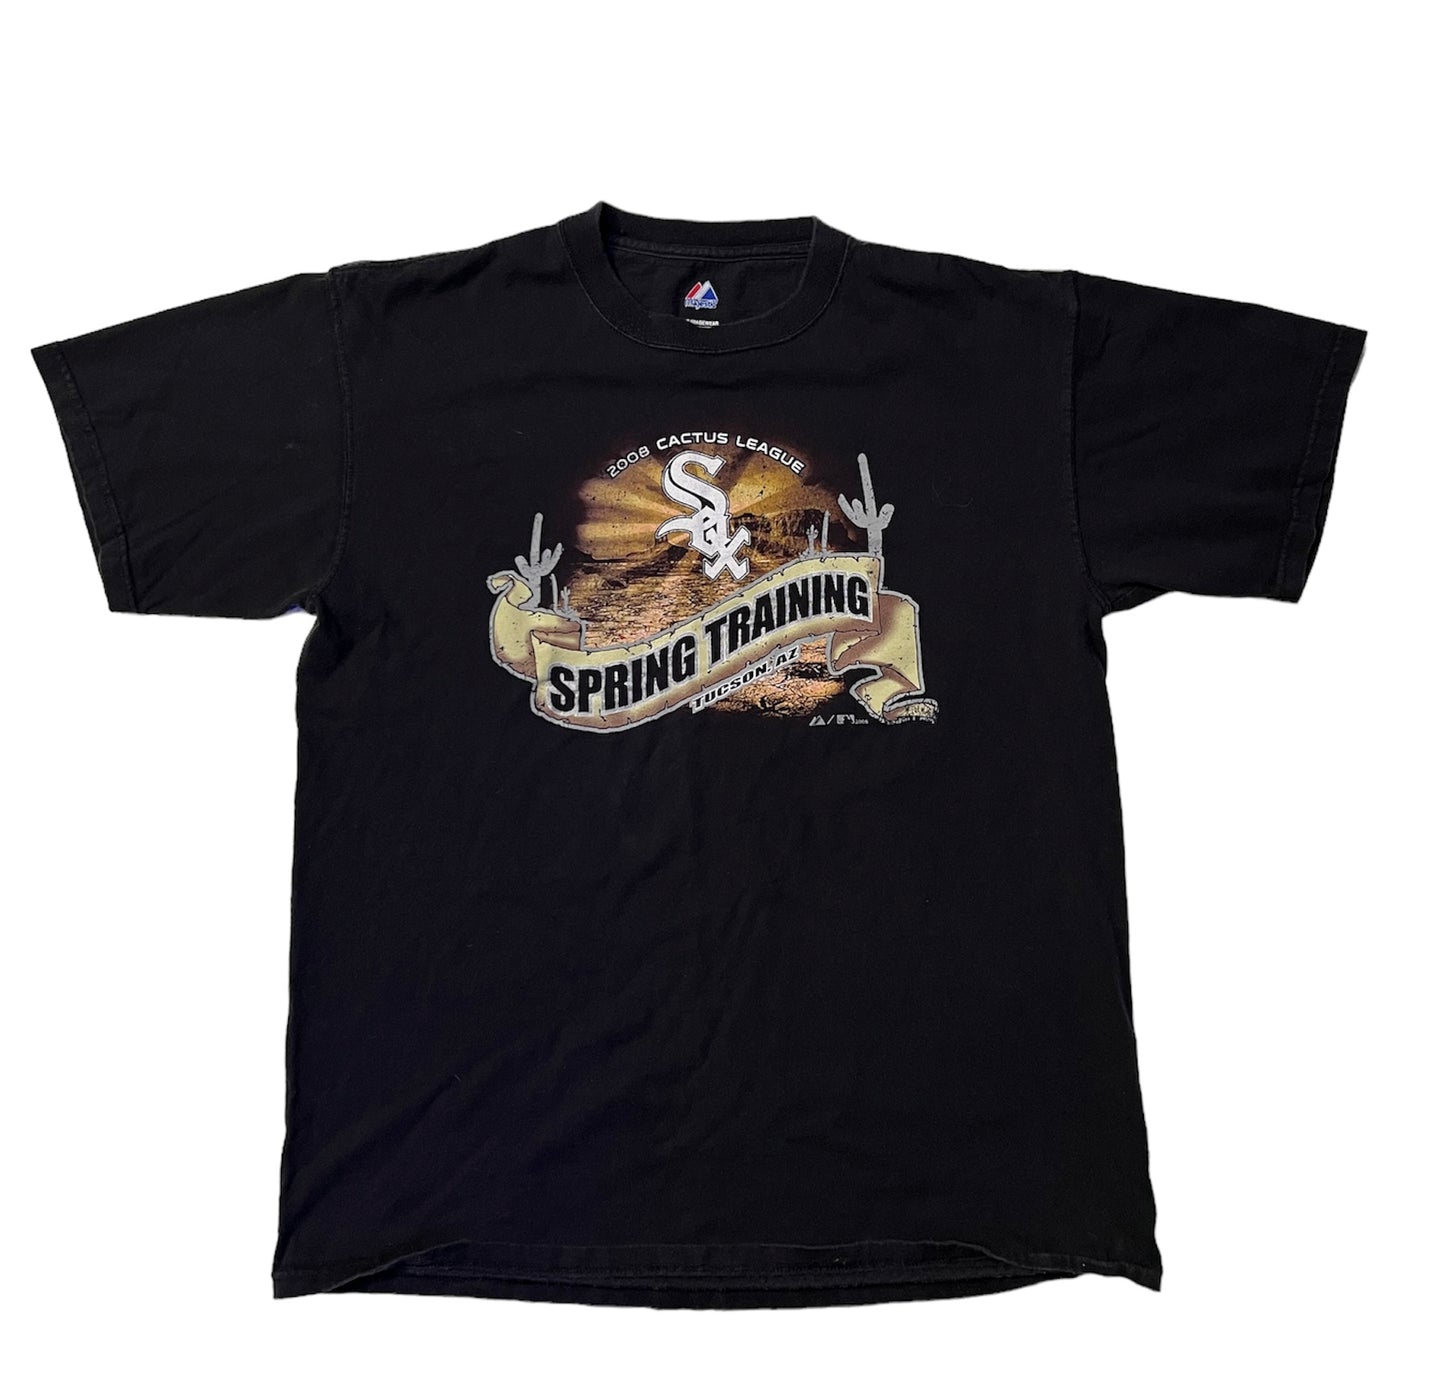 Vintage 00’s Chicago White Sox Spring Training Tee (2008)